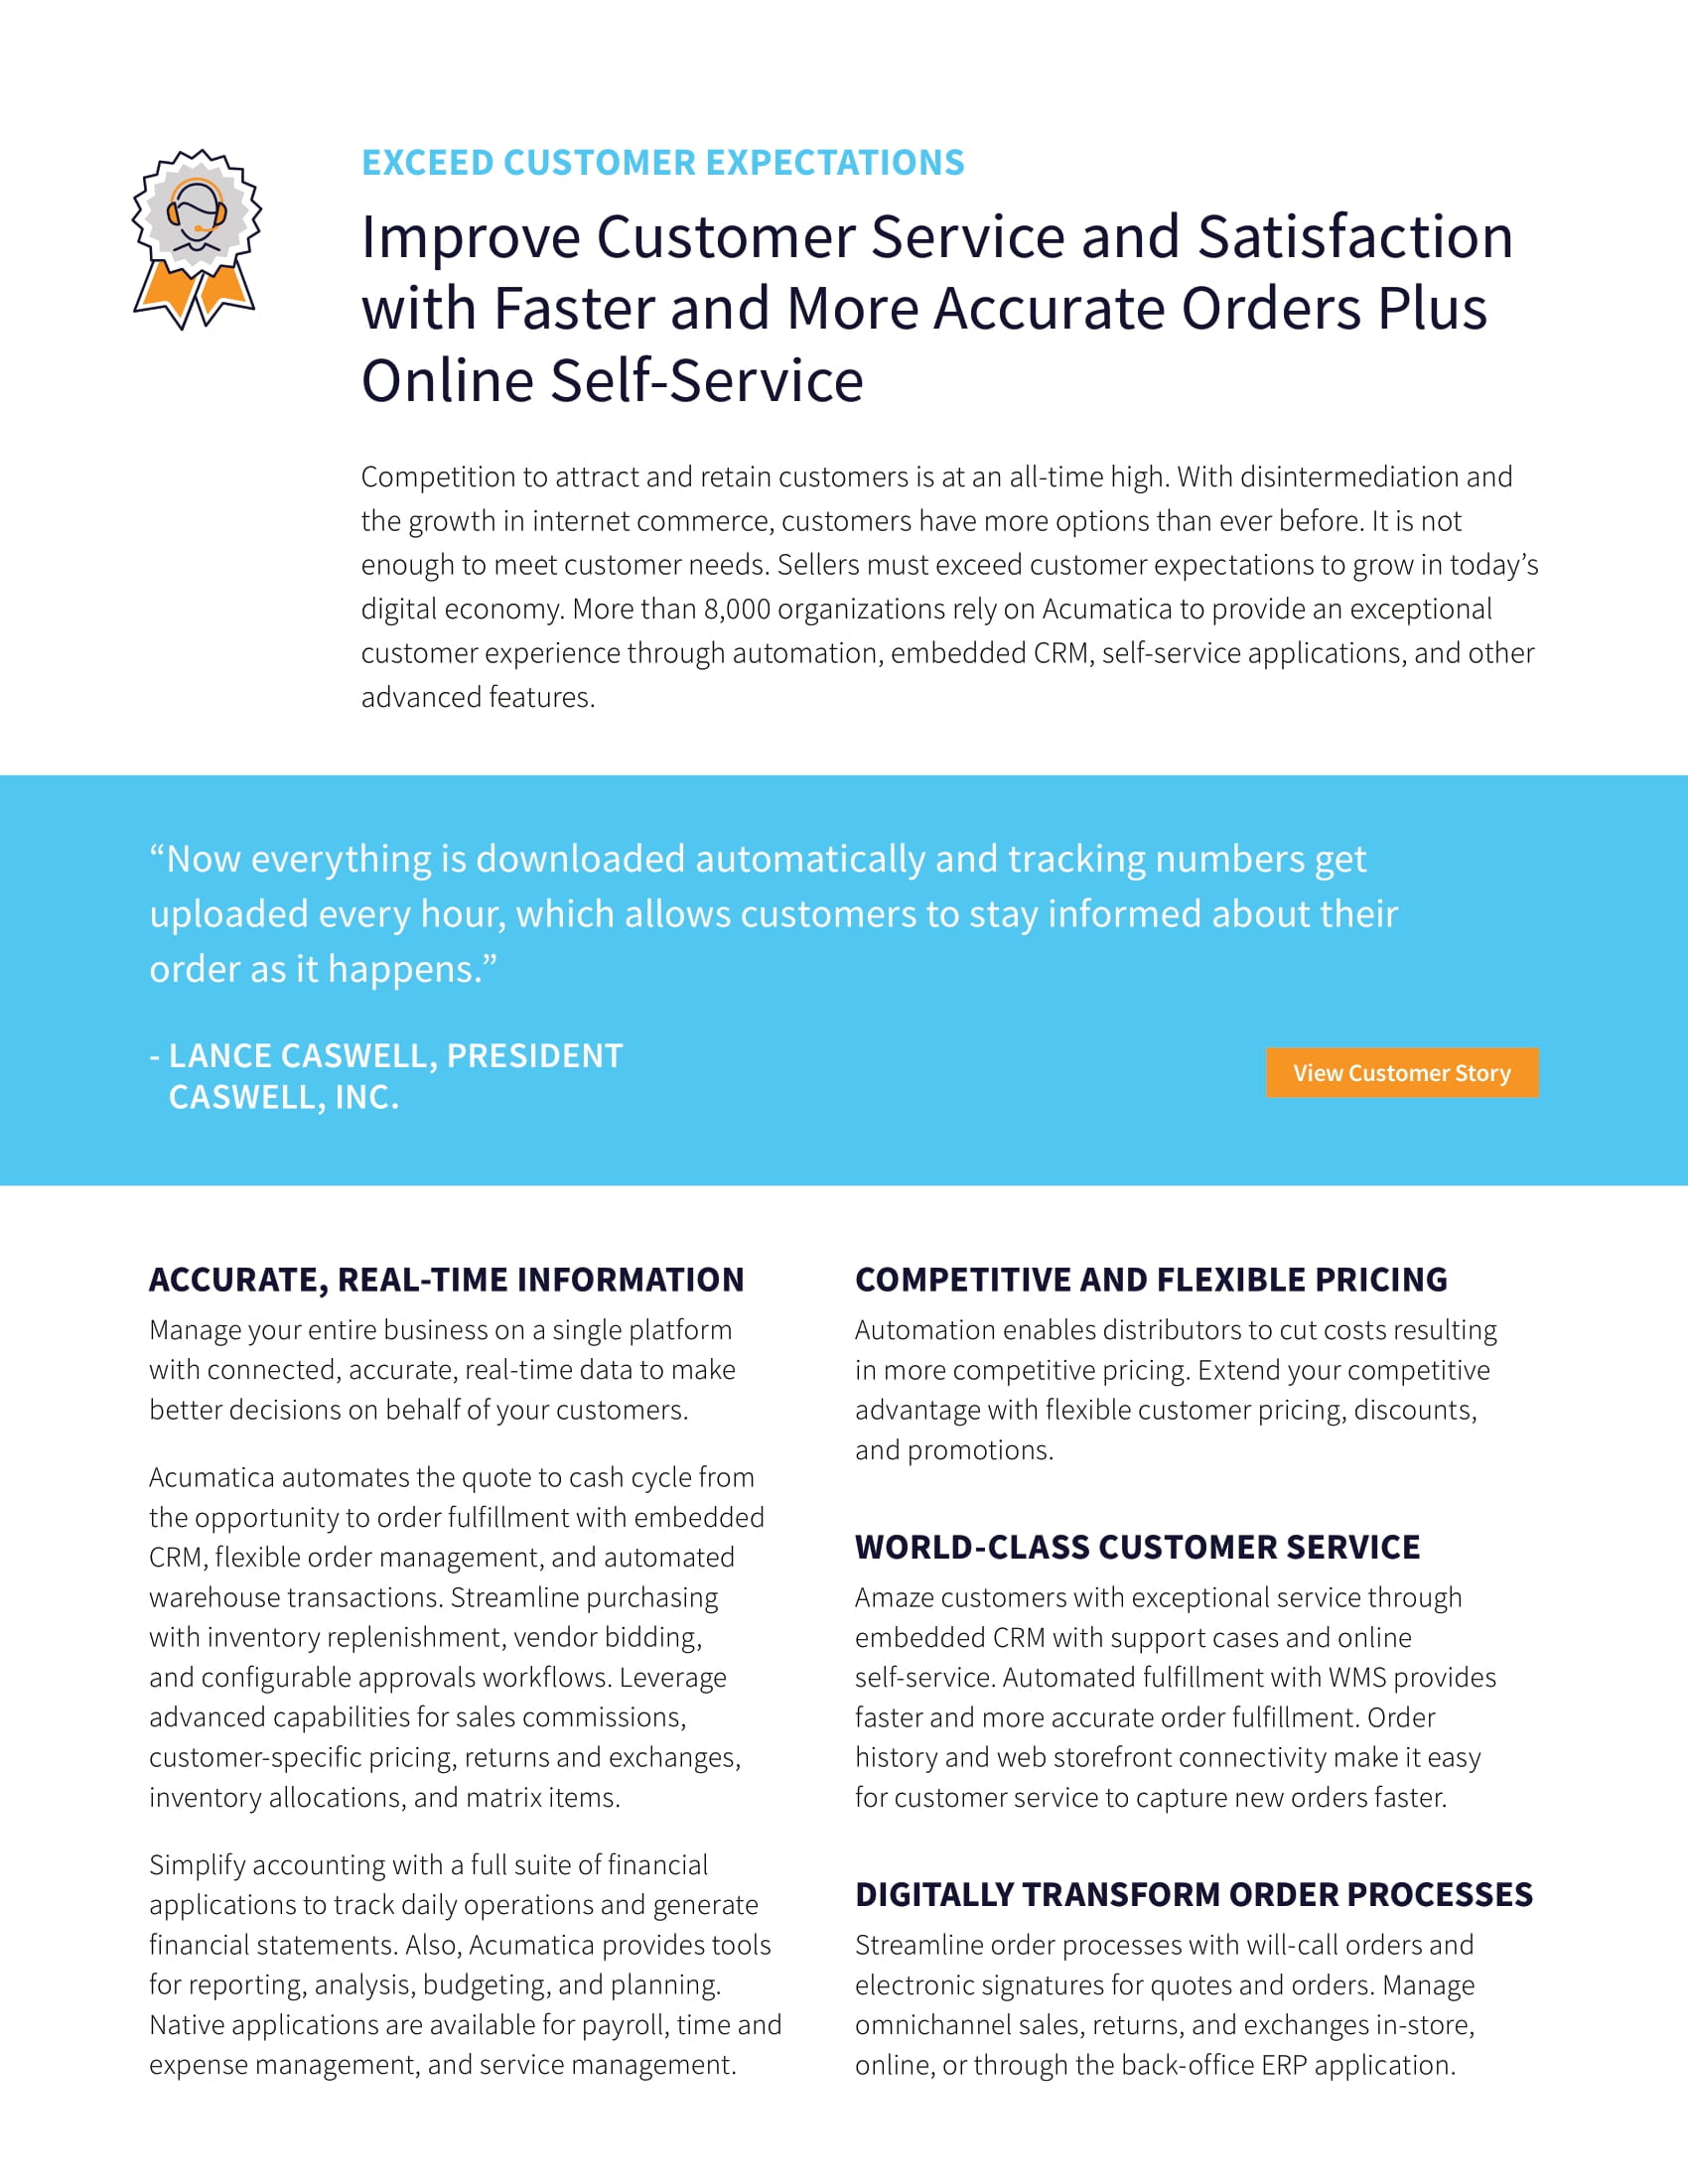 Powerful Growth for Retailers and eCommerce Companies with Acumatica’s Complete ERP Solution, page 2